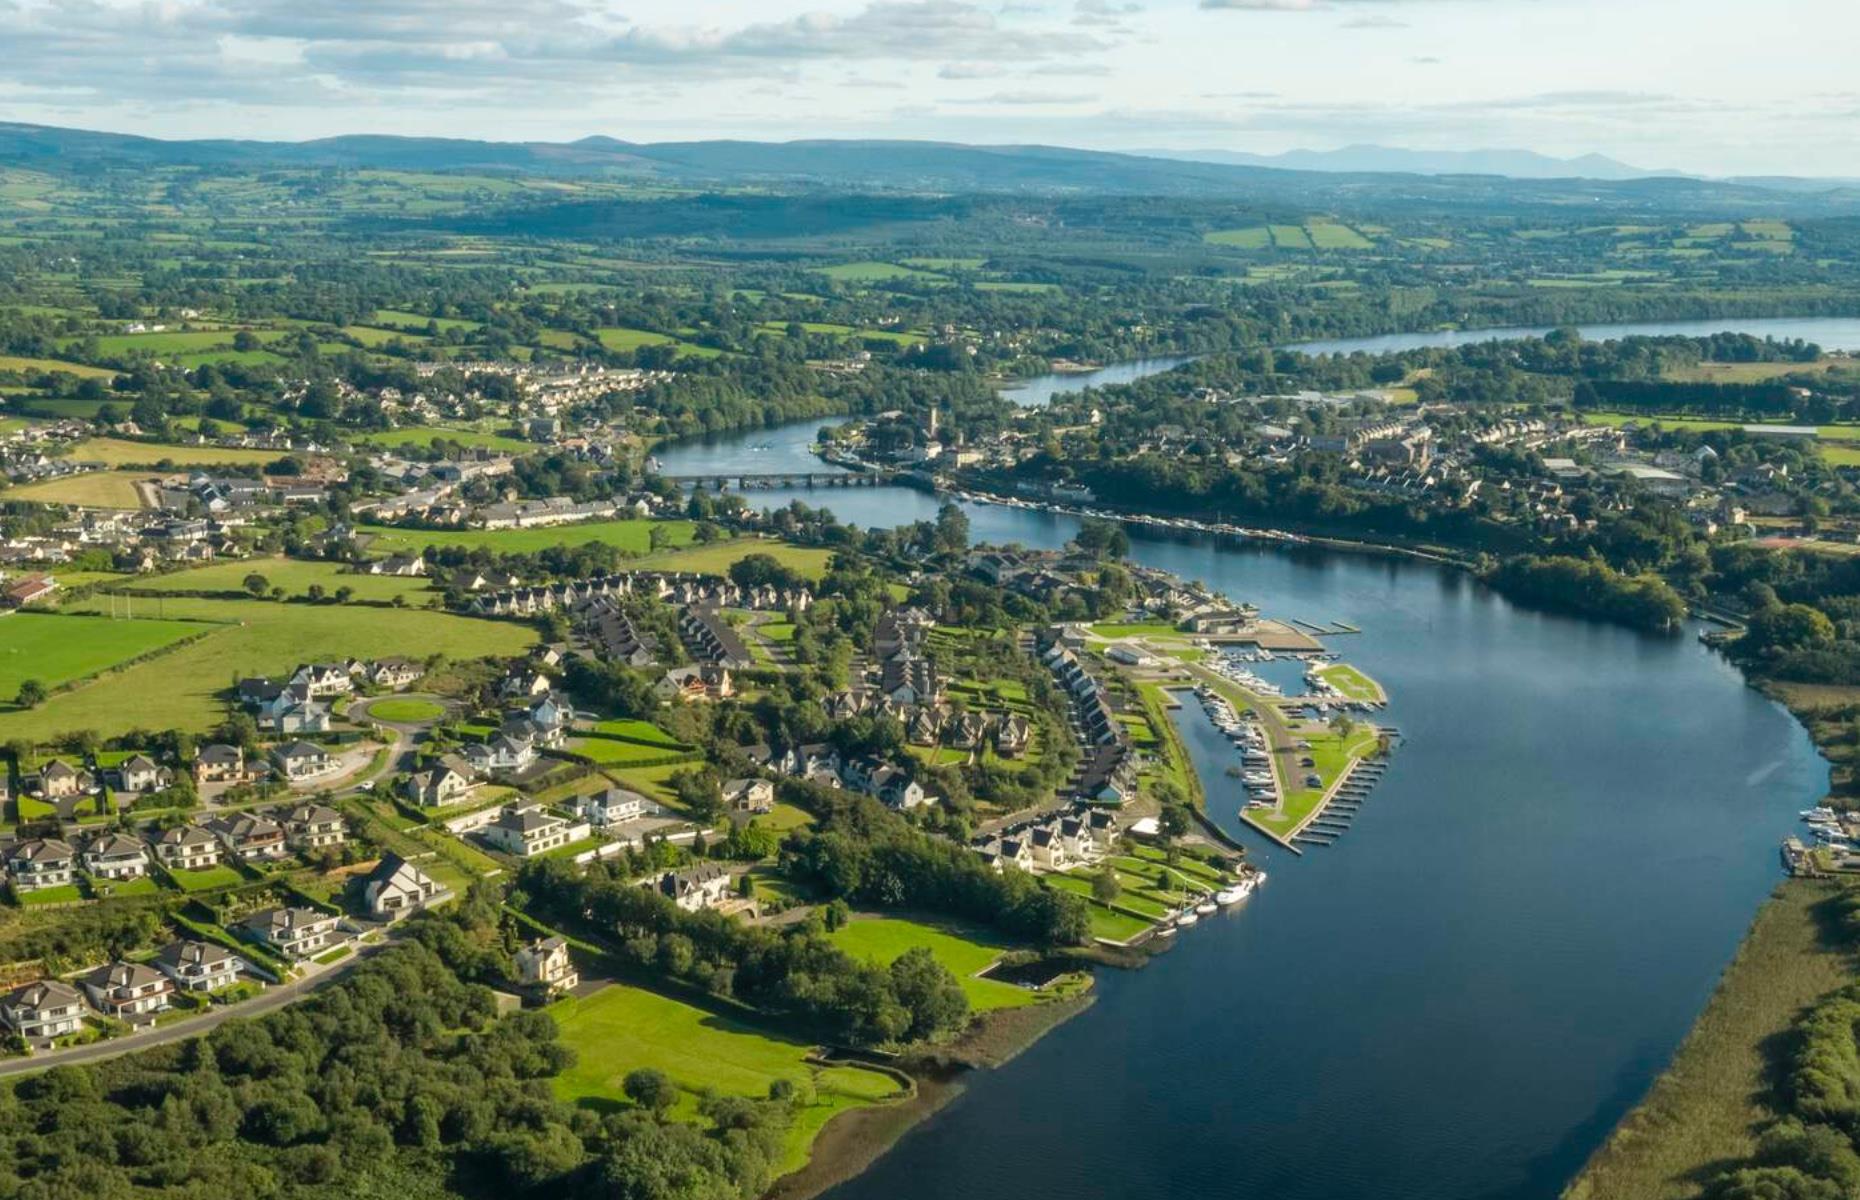 Scenic Killaloe is blessed with a beautiful setting on the River Shannon. The waterside market town is steeped in history, from medieval churches to charming streets. Lovely walks include strolling across the 13-arch stone bridge to the twin town of Ballina, following the  river as it flows gracefully upstream.